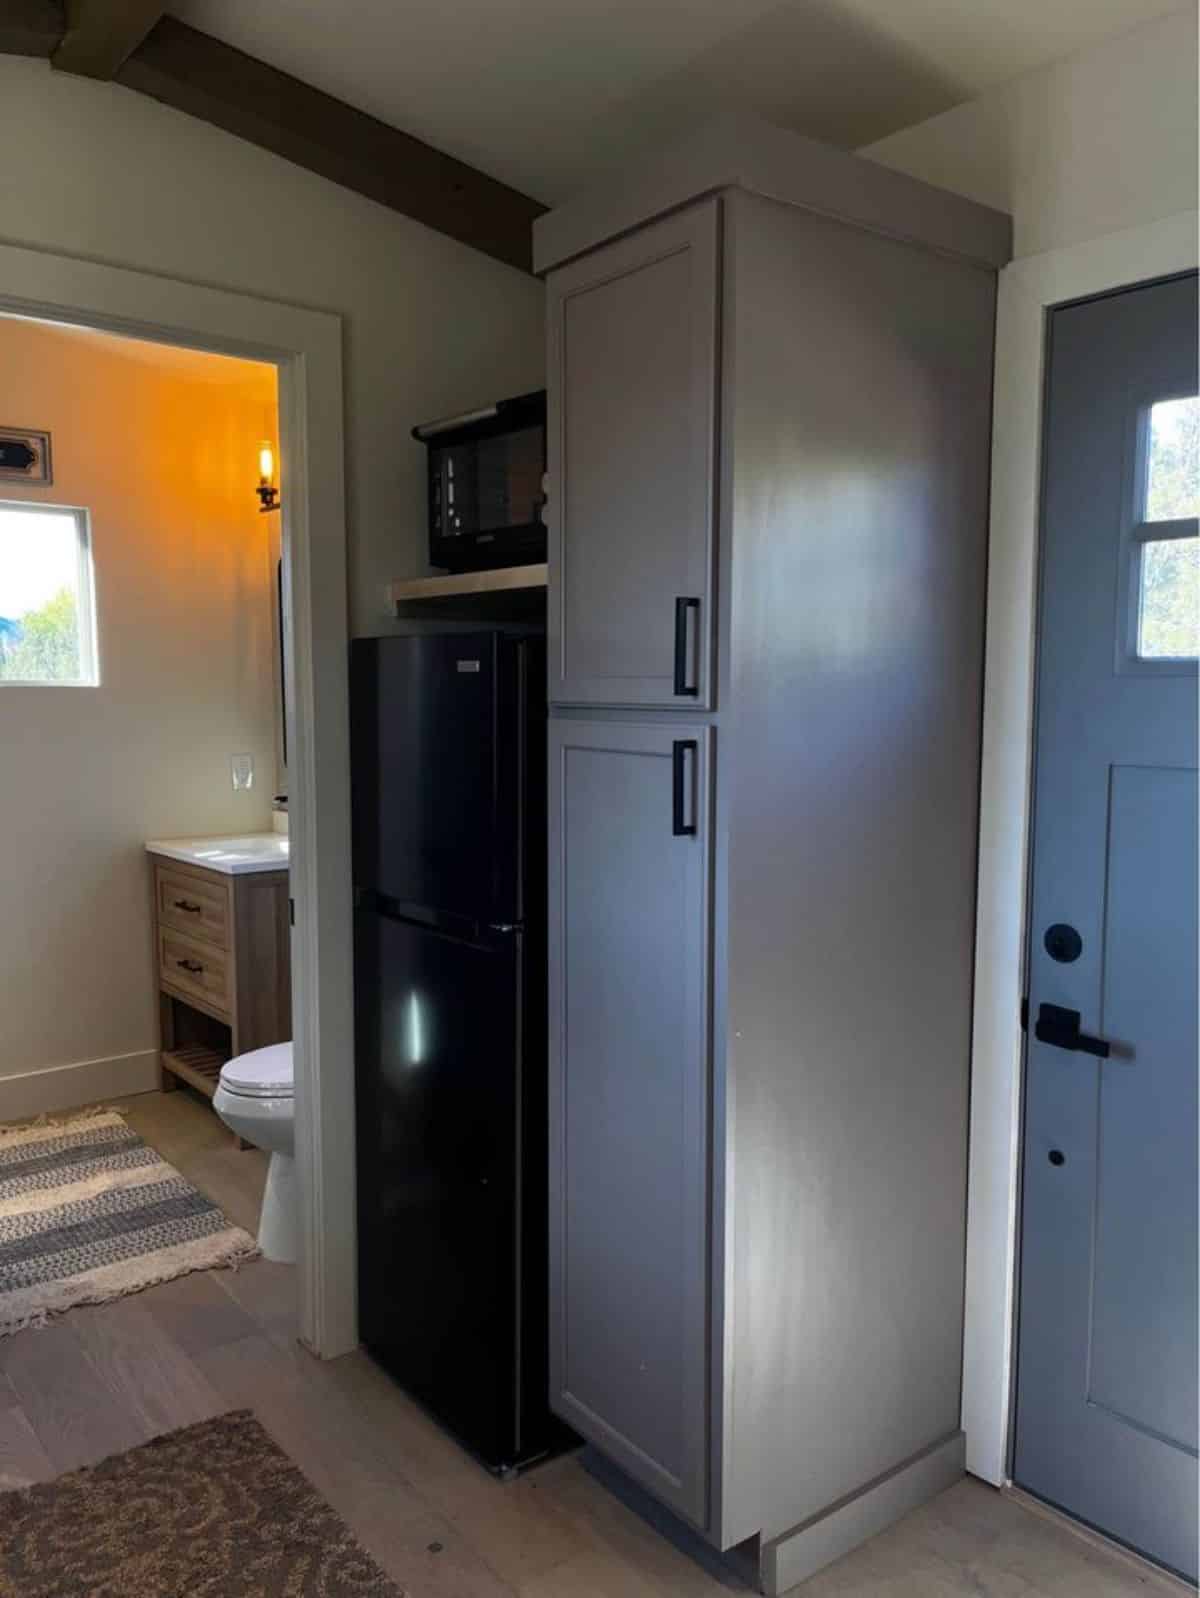 Right when you step inside the house you will find a huge storage cabinets and refrigerator